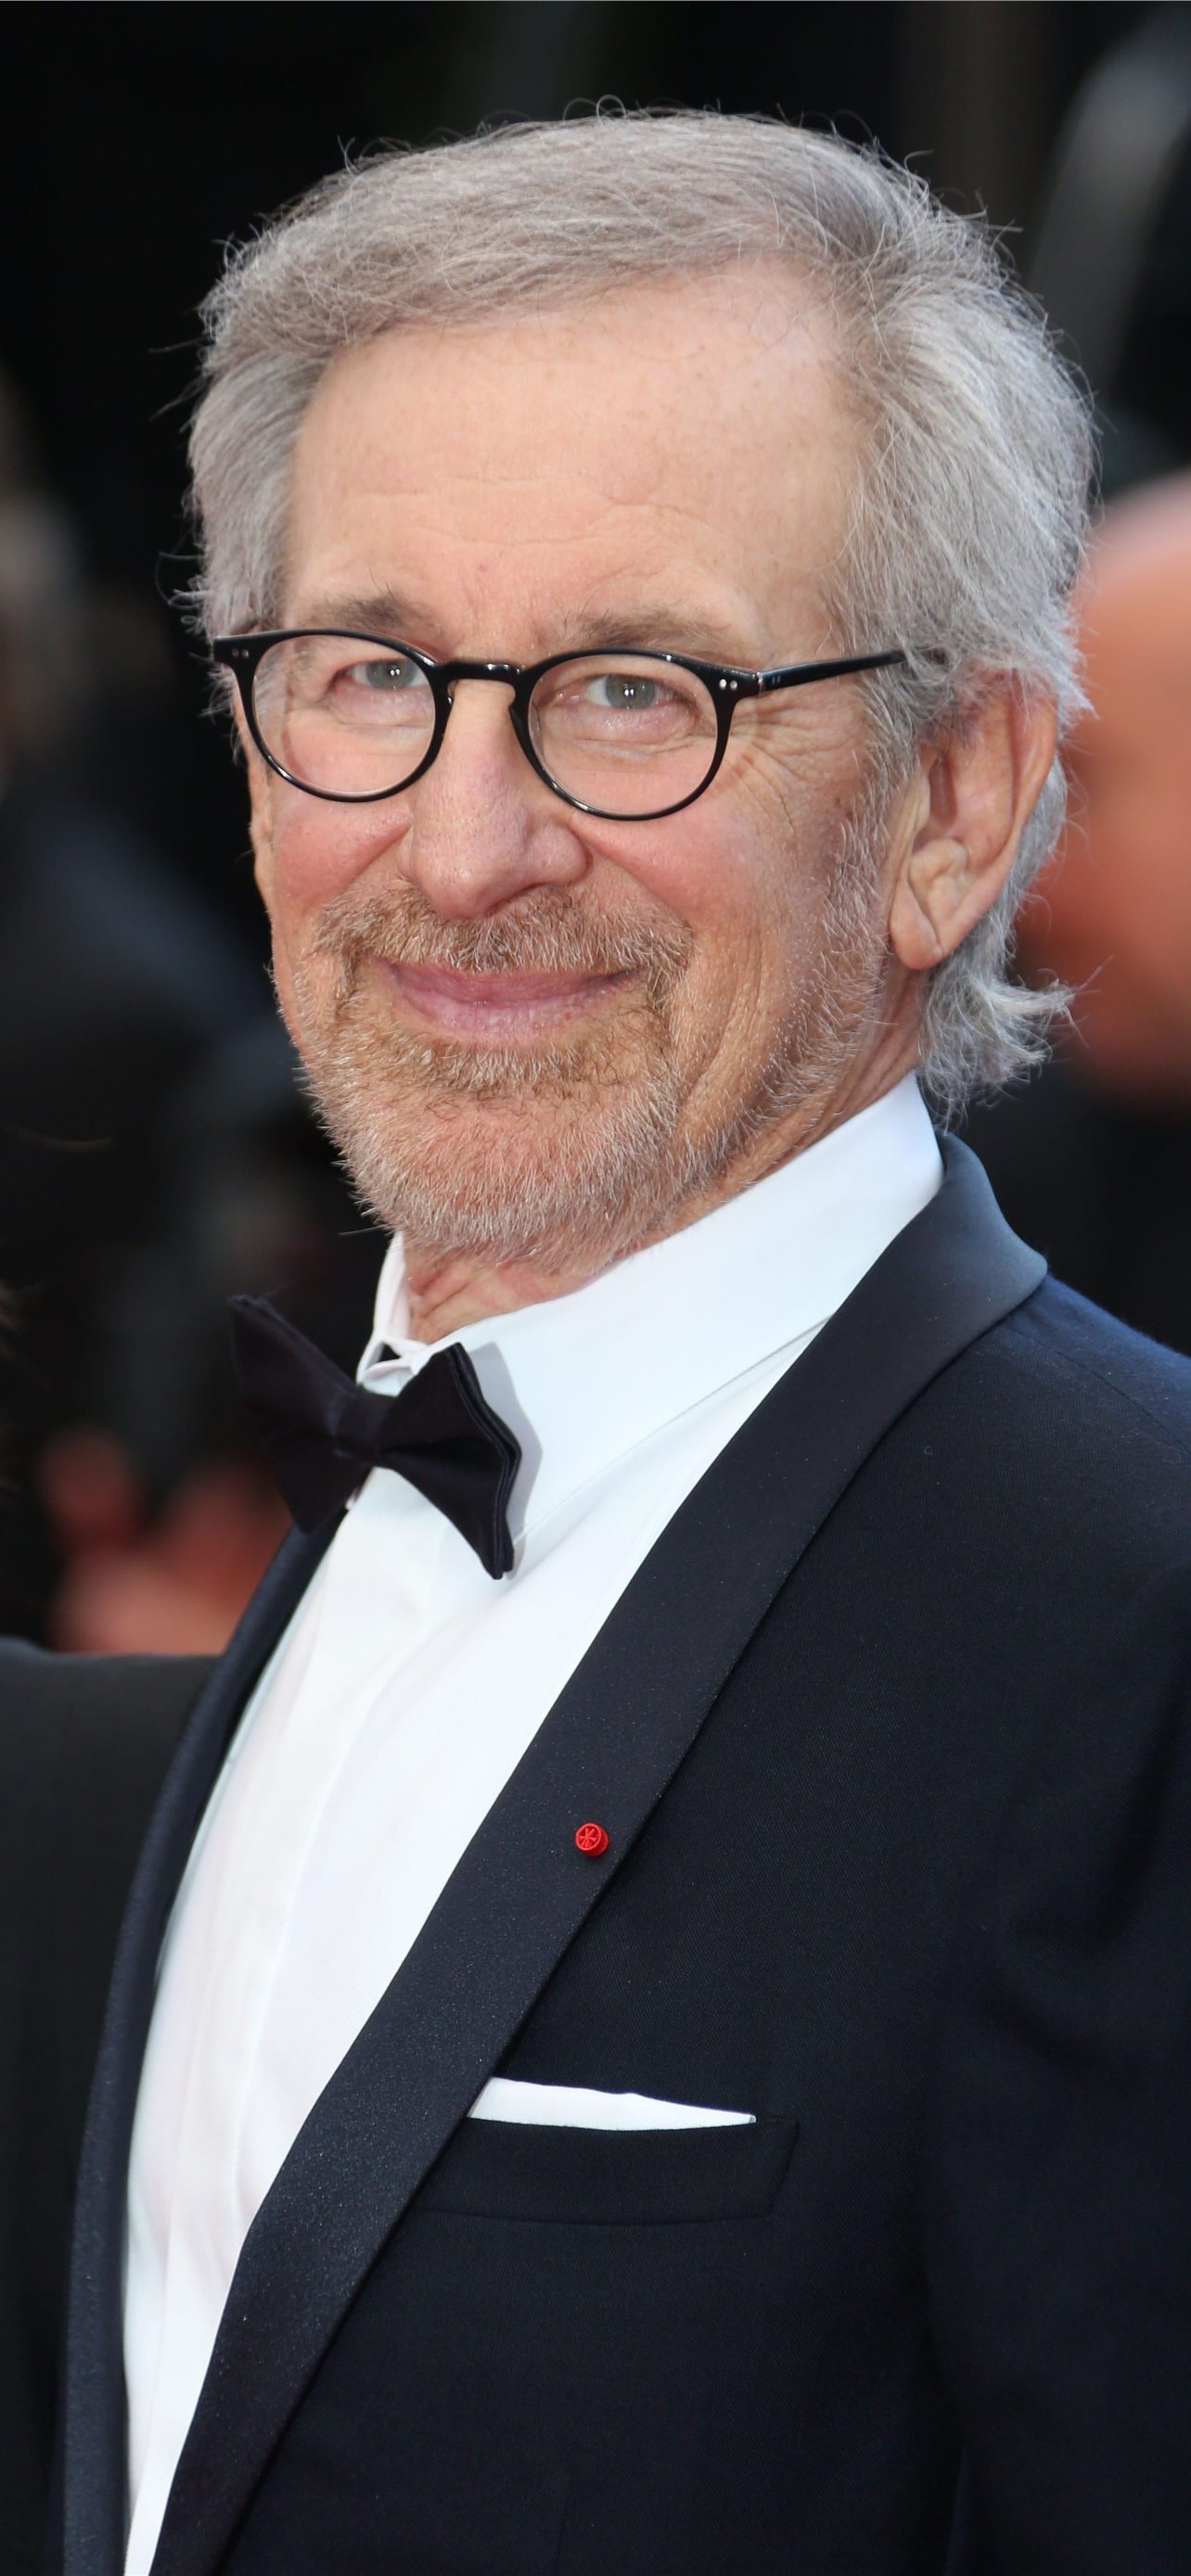 Steven Spielberg, iPhone HD wallpapers, Best collection, Visual delight, 1290x2780 HD Phone